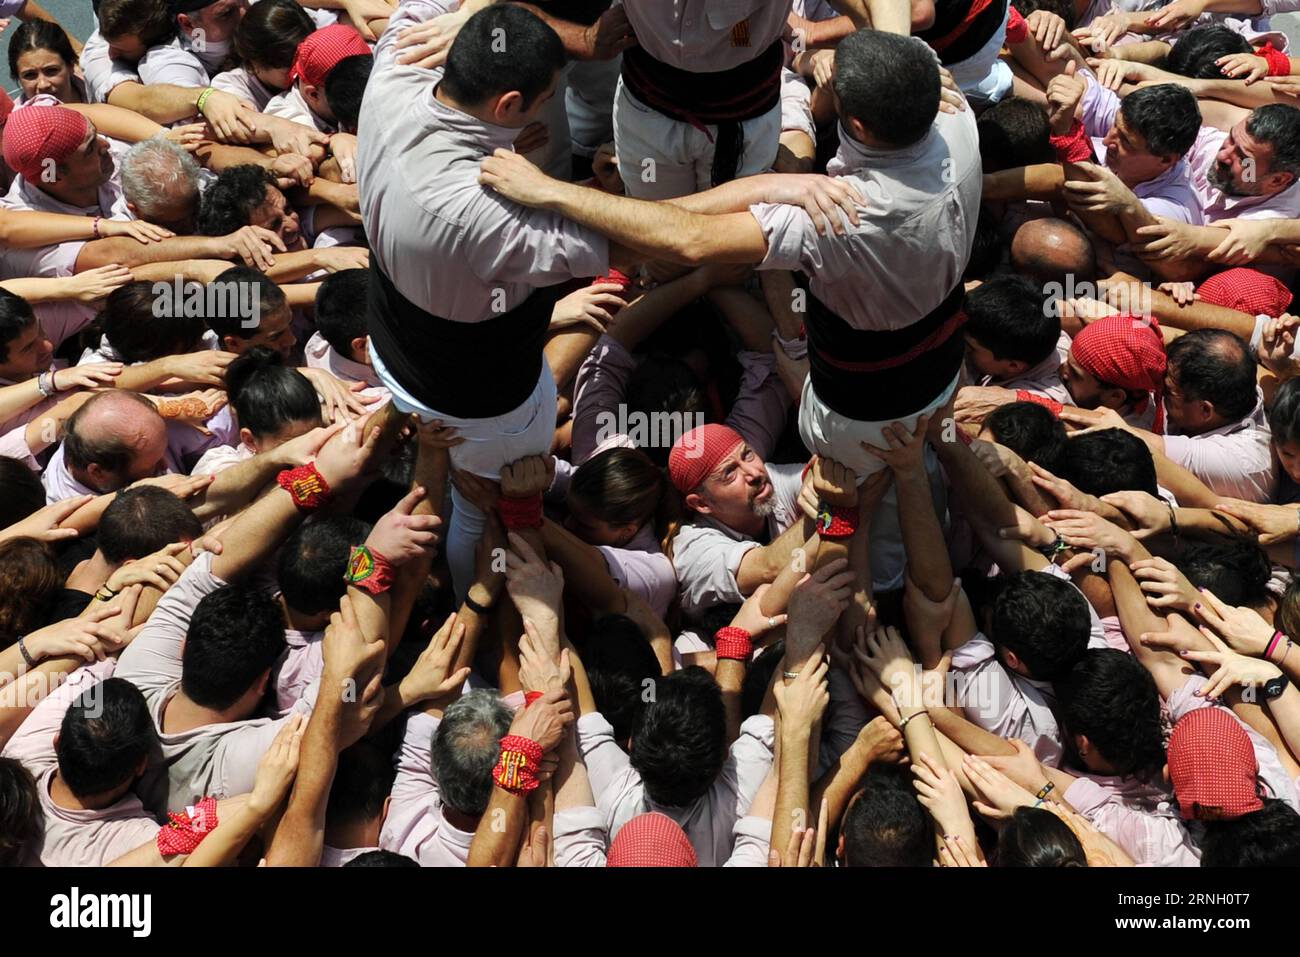 Katalanische Woche in Singapur (161020) -- SINGAPORE, Oct. 20, 2016 -- Catalonian castellers form human towers during the Catalonia Week at Singapore s Sentosa island on Oct. 20, 2016. The famous castellers from Minyons de Terrassa participated in the Catalonia Week held in Singapore from Oct. 18 to Oct. 21. )(dtf) SINGAPORE-CATALONIA WEEK-CASTELLER ThenxChihxWey PUBLICATIONxNOTxINxCHN   Catalan Week in Singapore  Singapore OCT 20 2016 catalonian Castellers Shape Human Towers during The Catalonia Week AT Singapore S Sentosa Iceland ON OCT 20 2016 The Famous Castellers from Minyons de Terrassa Stock Photo